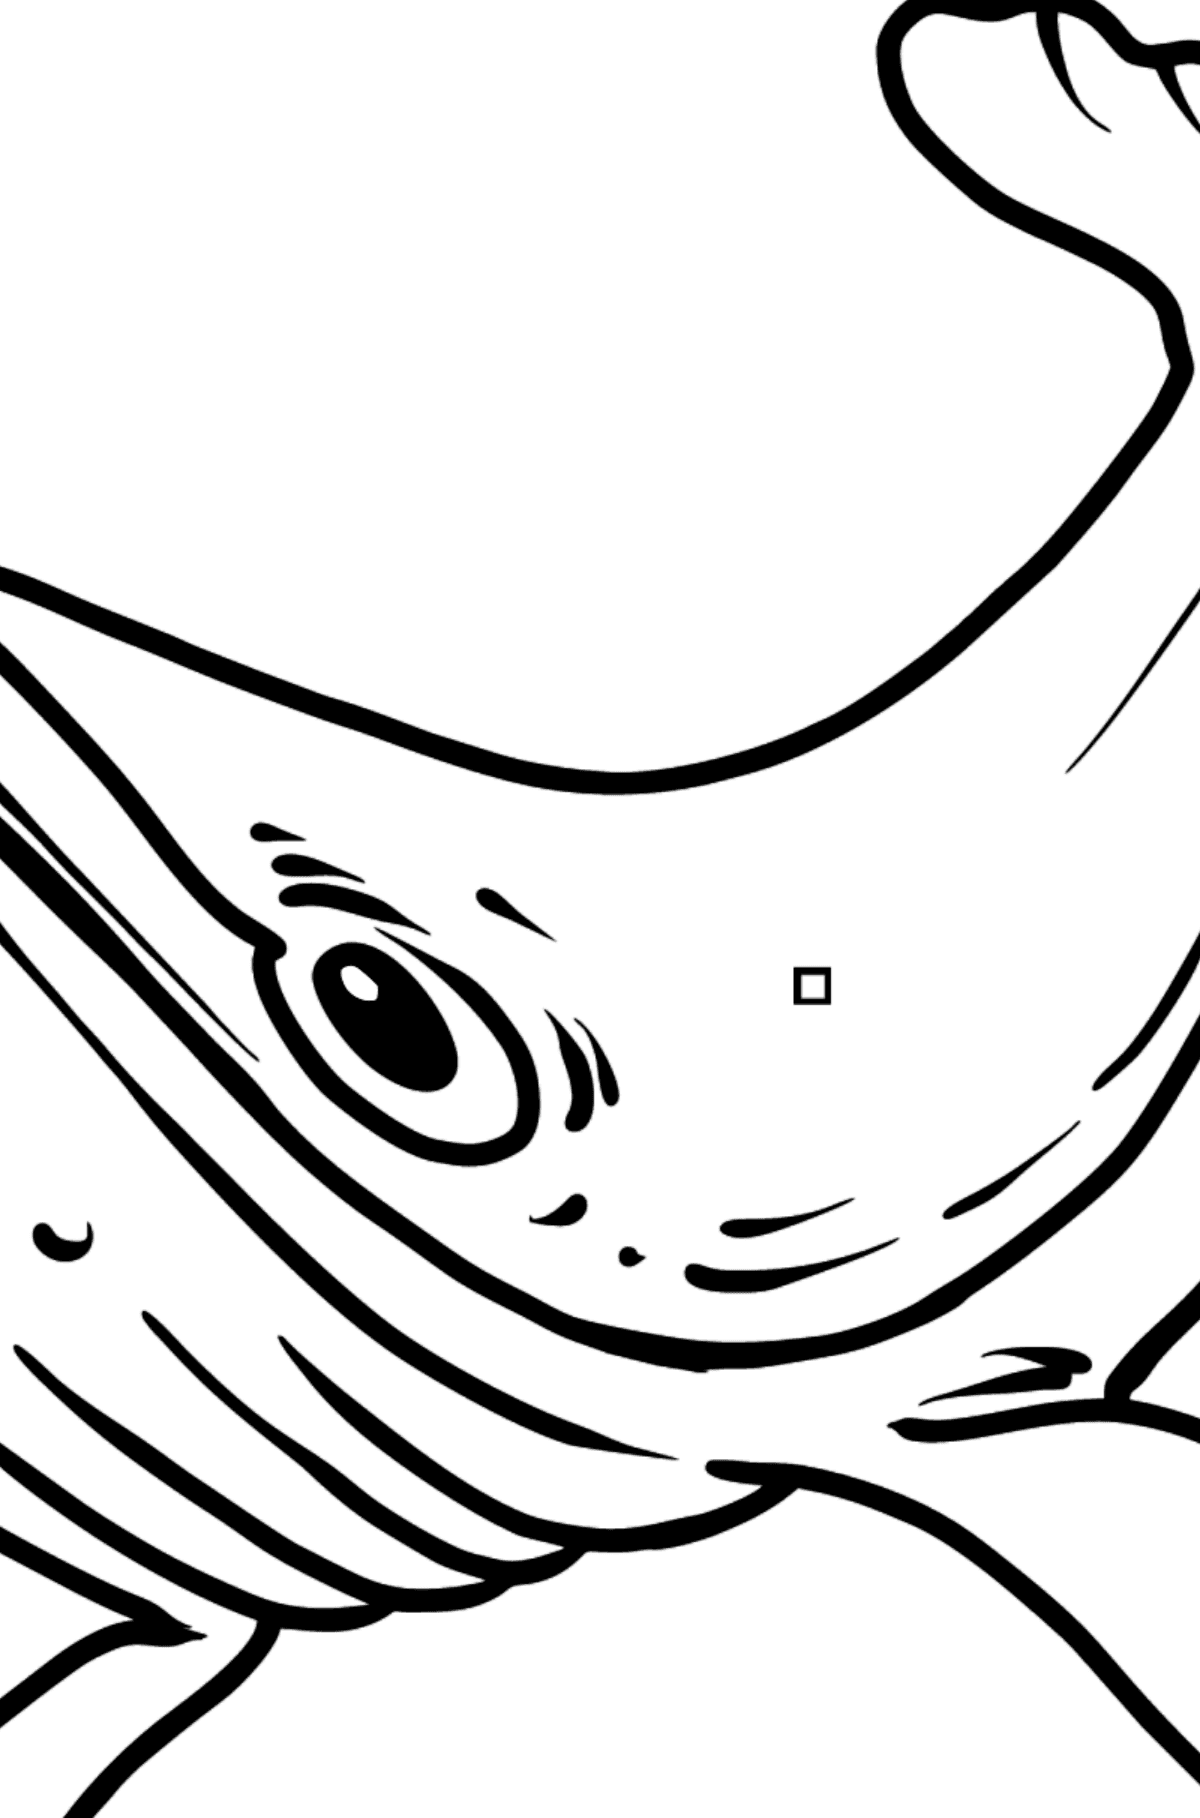 Whale coloring page - Coloring by Symbols and Geometric Shapes for Kids